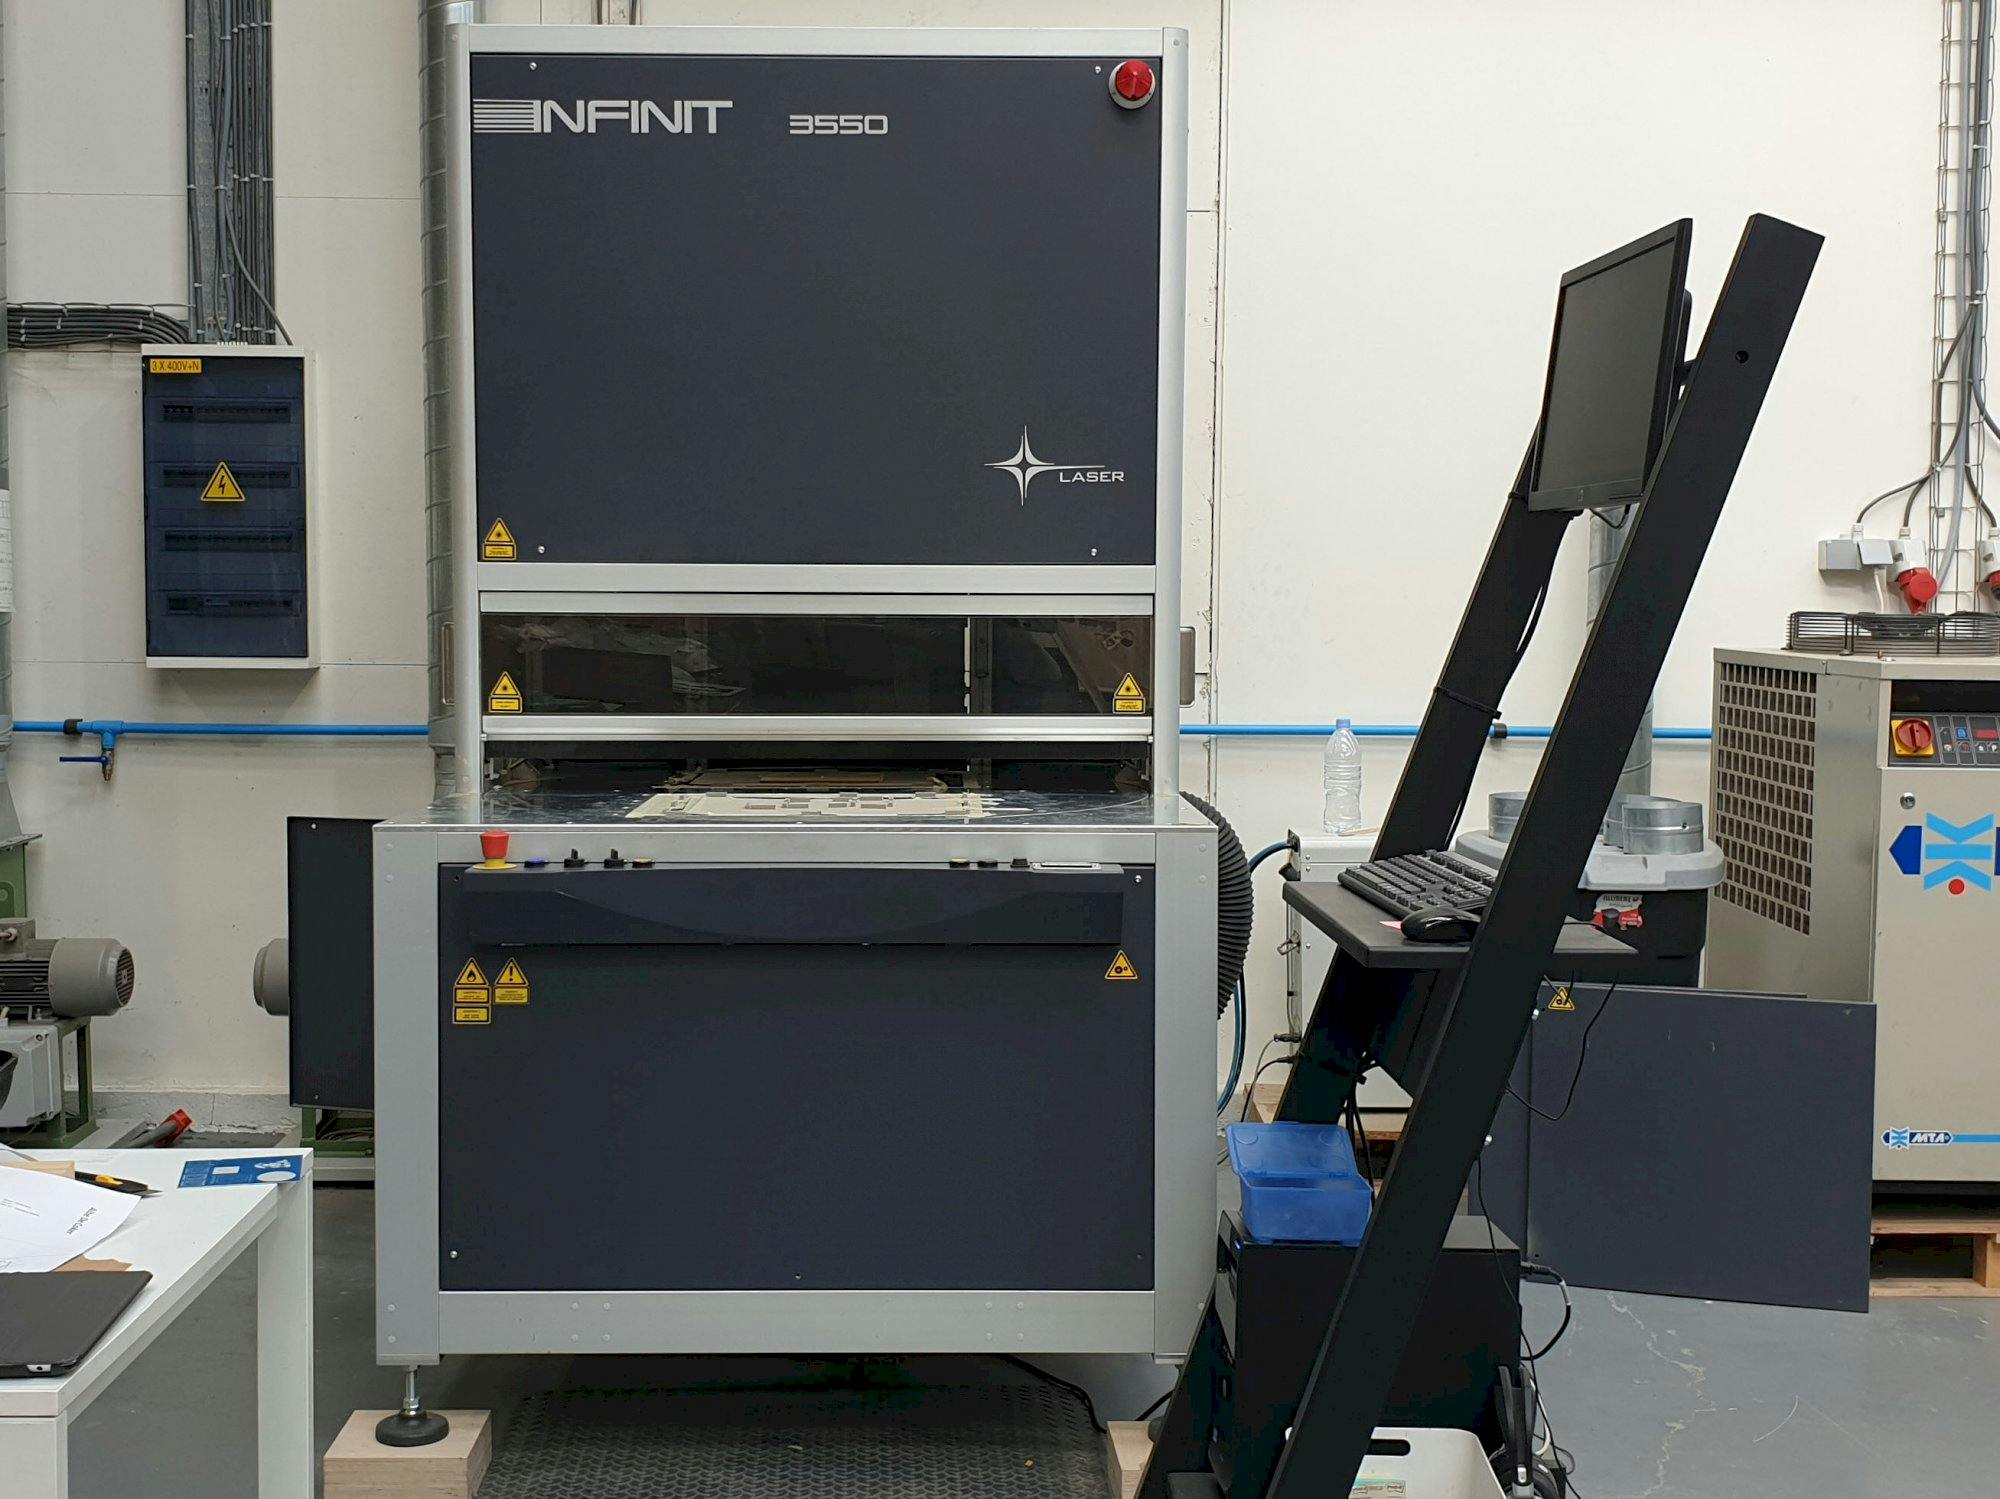 Front view of SEI Laser INFINITY 3550 Machine